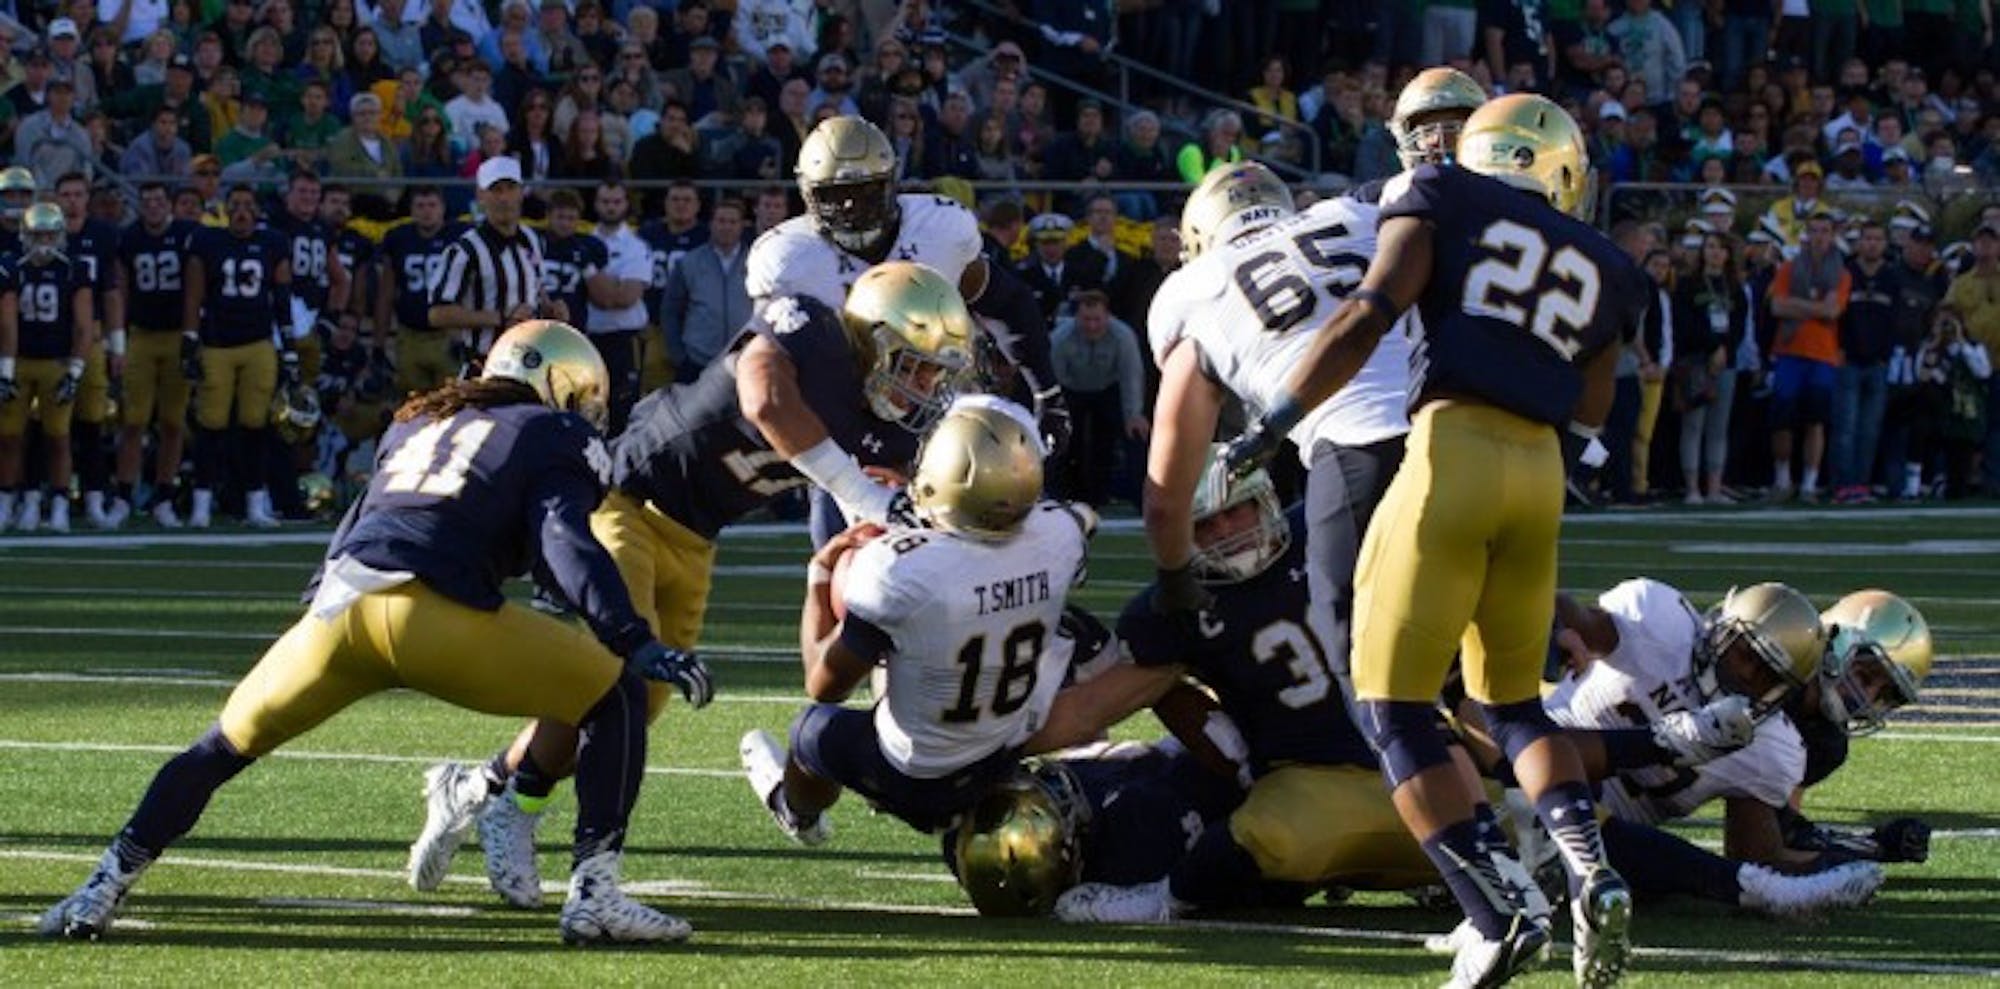 Graduate student cornerback Matthias Farley, 41, and senior safety Elijah Shumate, 22, get in on a tackle during Notre Dame’s 41-24 win over Navy last Saturday at Notre Dame Stadium.